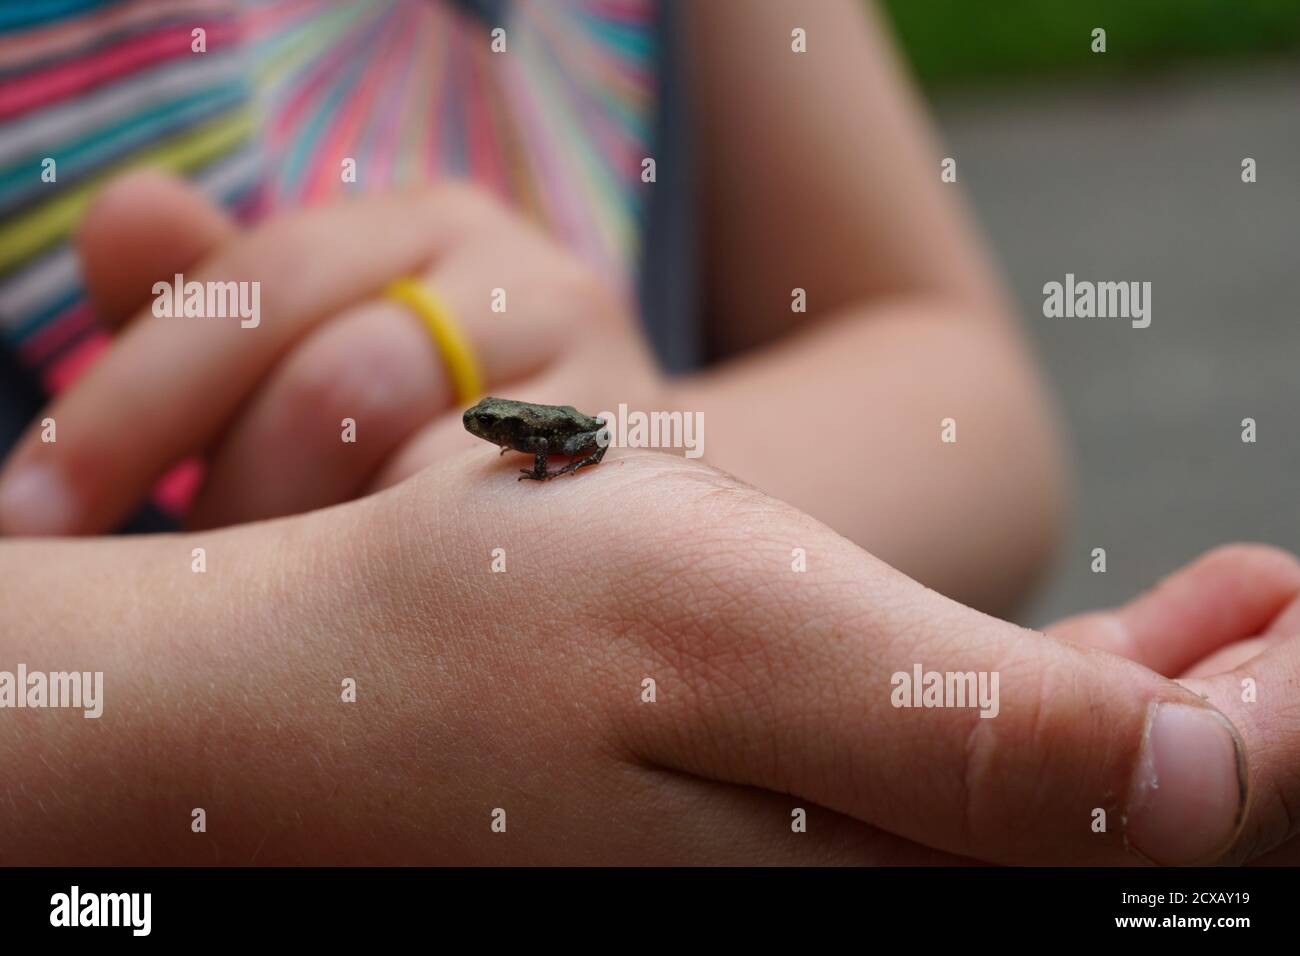 Tiny frog crawling on a child's hand Stock Photo